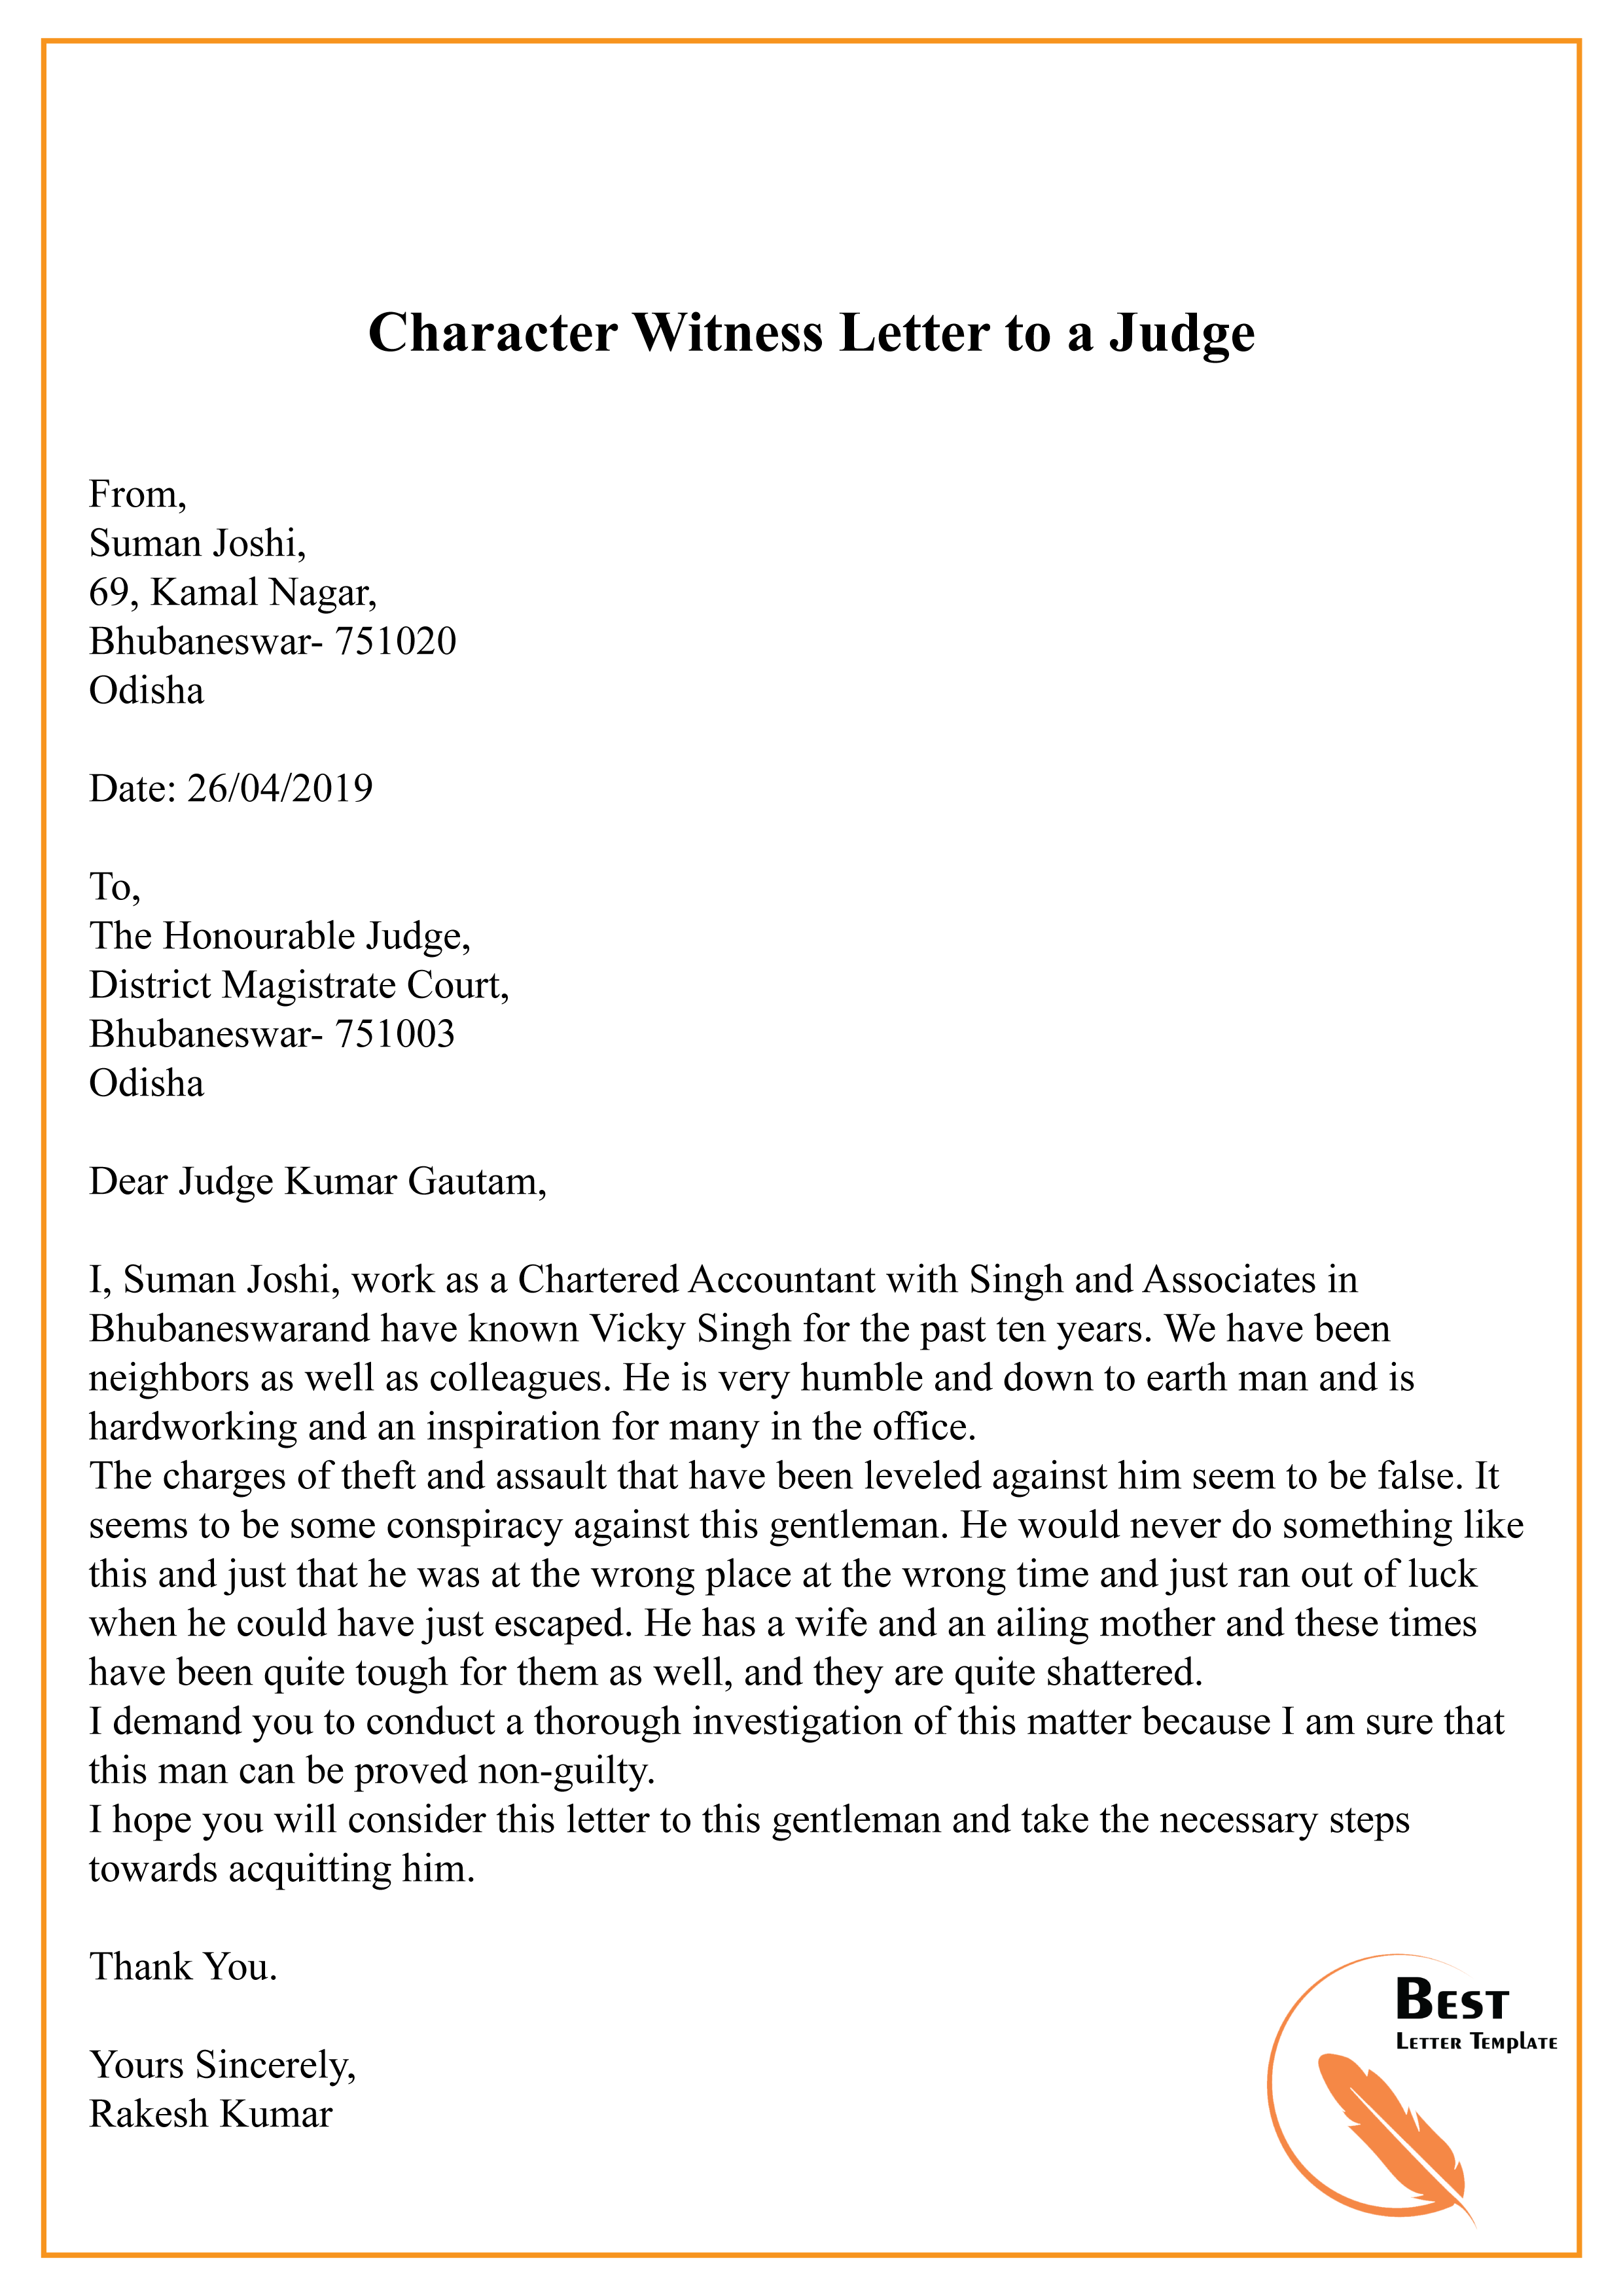 Character Witness Letter To A Judge 01 Best Letter Template